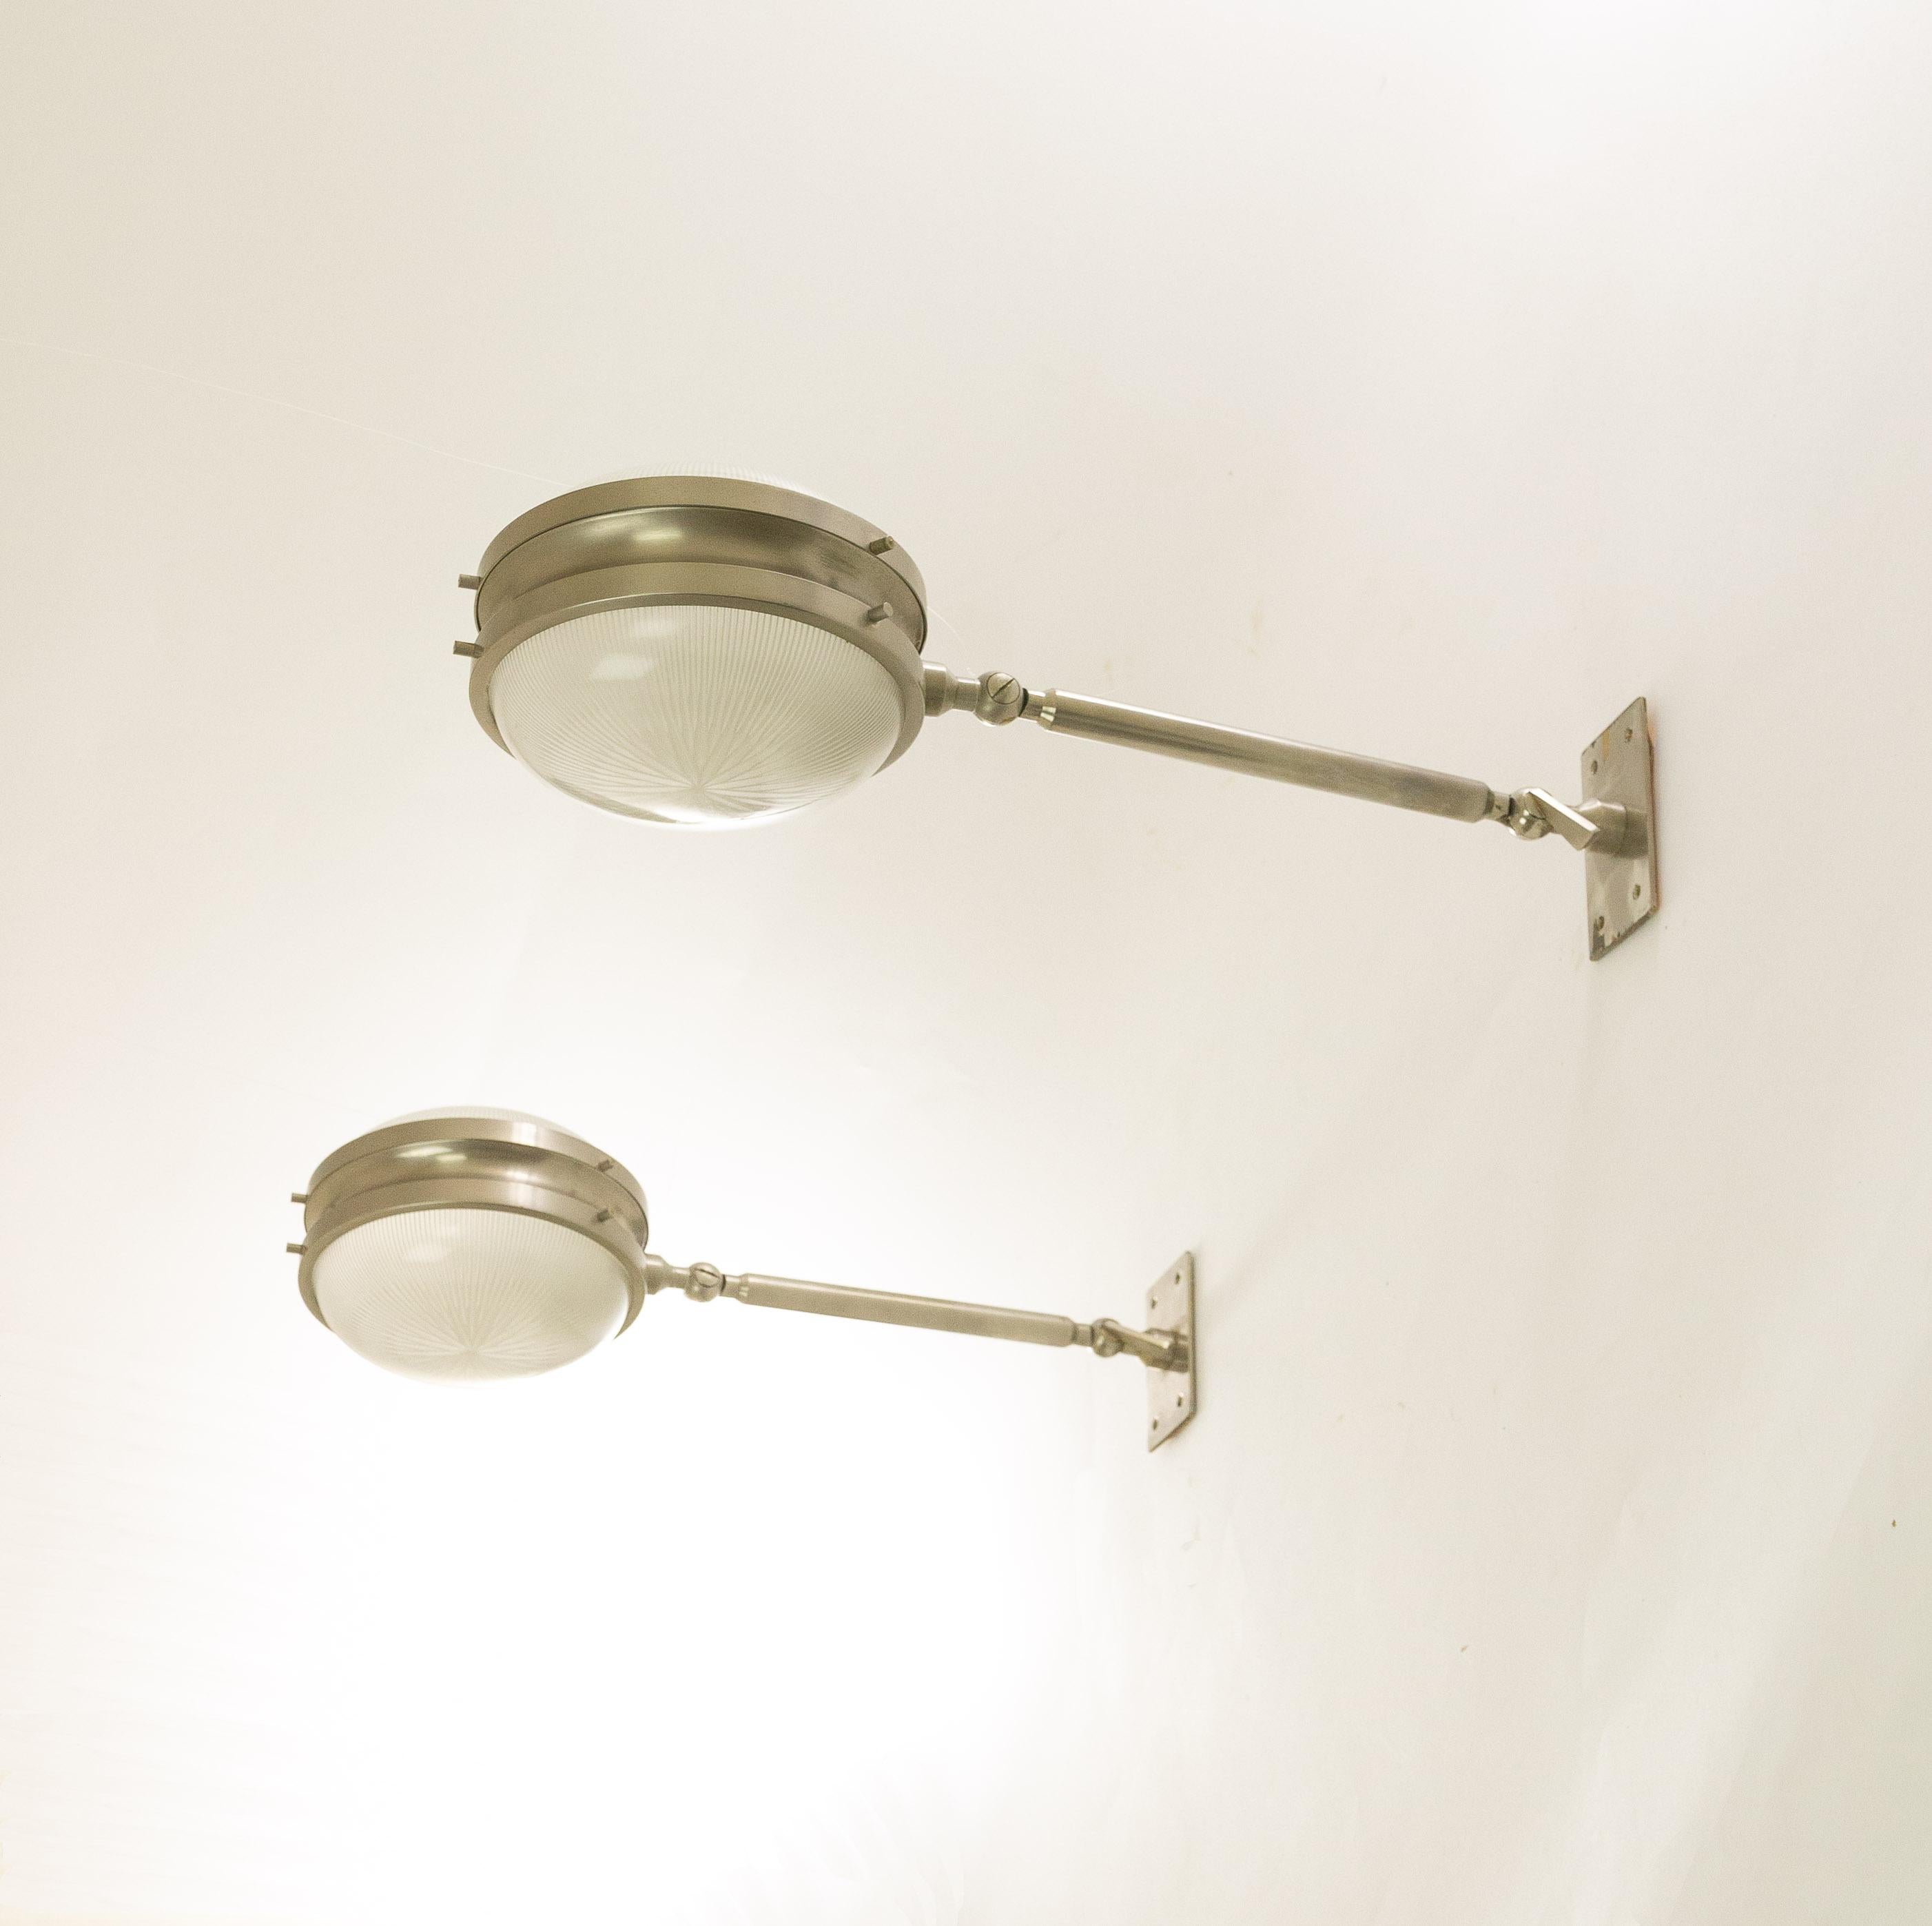 A pair of Gamma wall lamps designed by Sergio Mazza for Italian lighting manufacturer Artemide in the 1960s.

The lamps are adjustable. They have two hinges, at the beginning and end of the rod, that allow the lamps to be adjusted in different